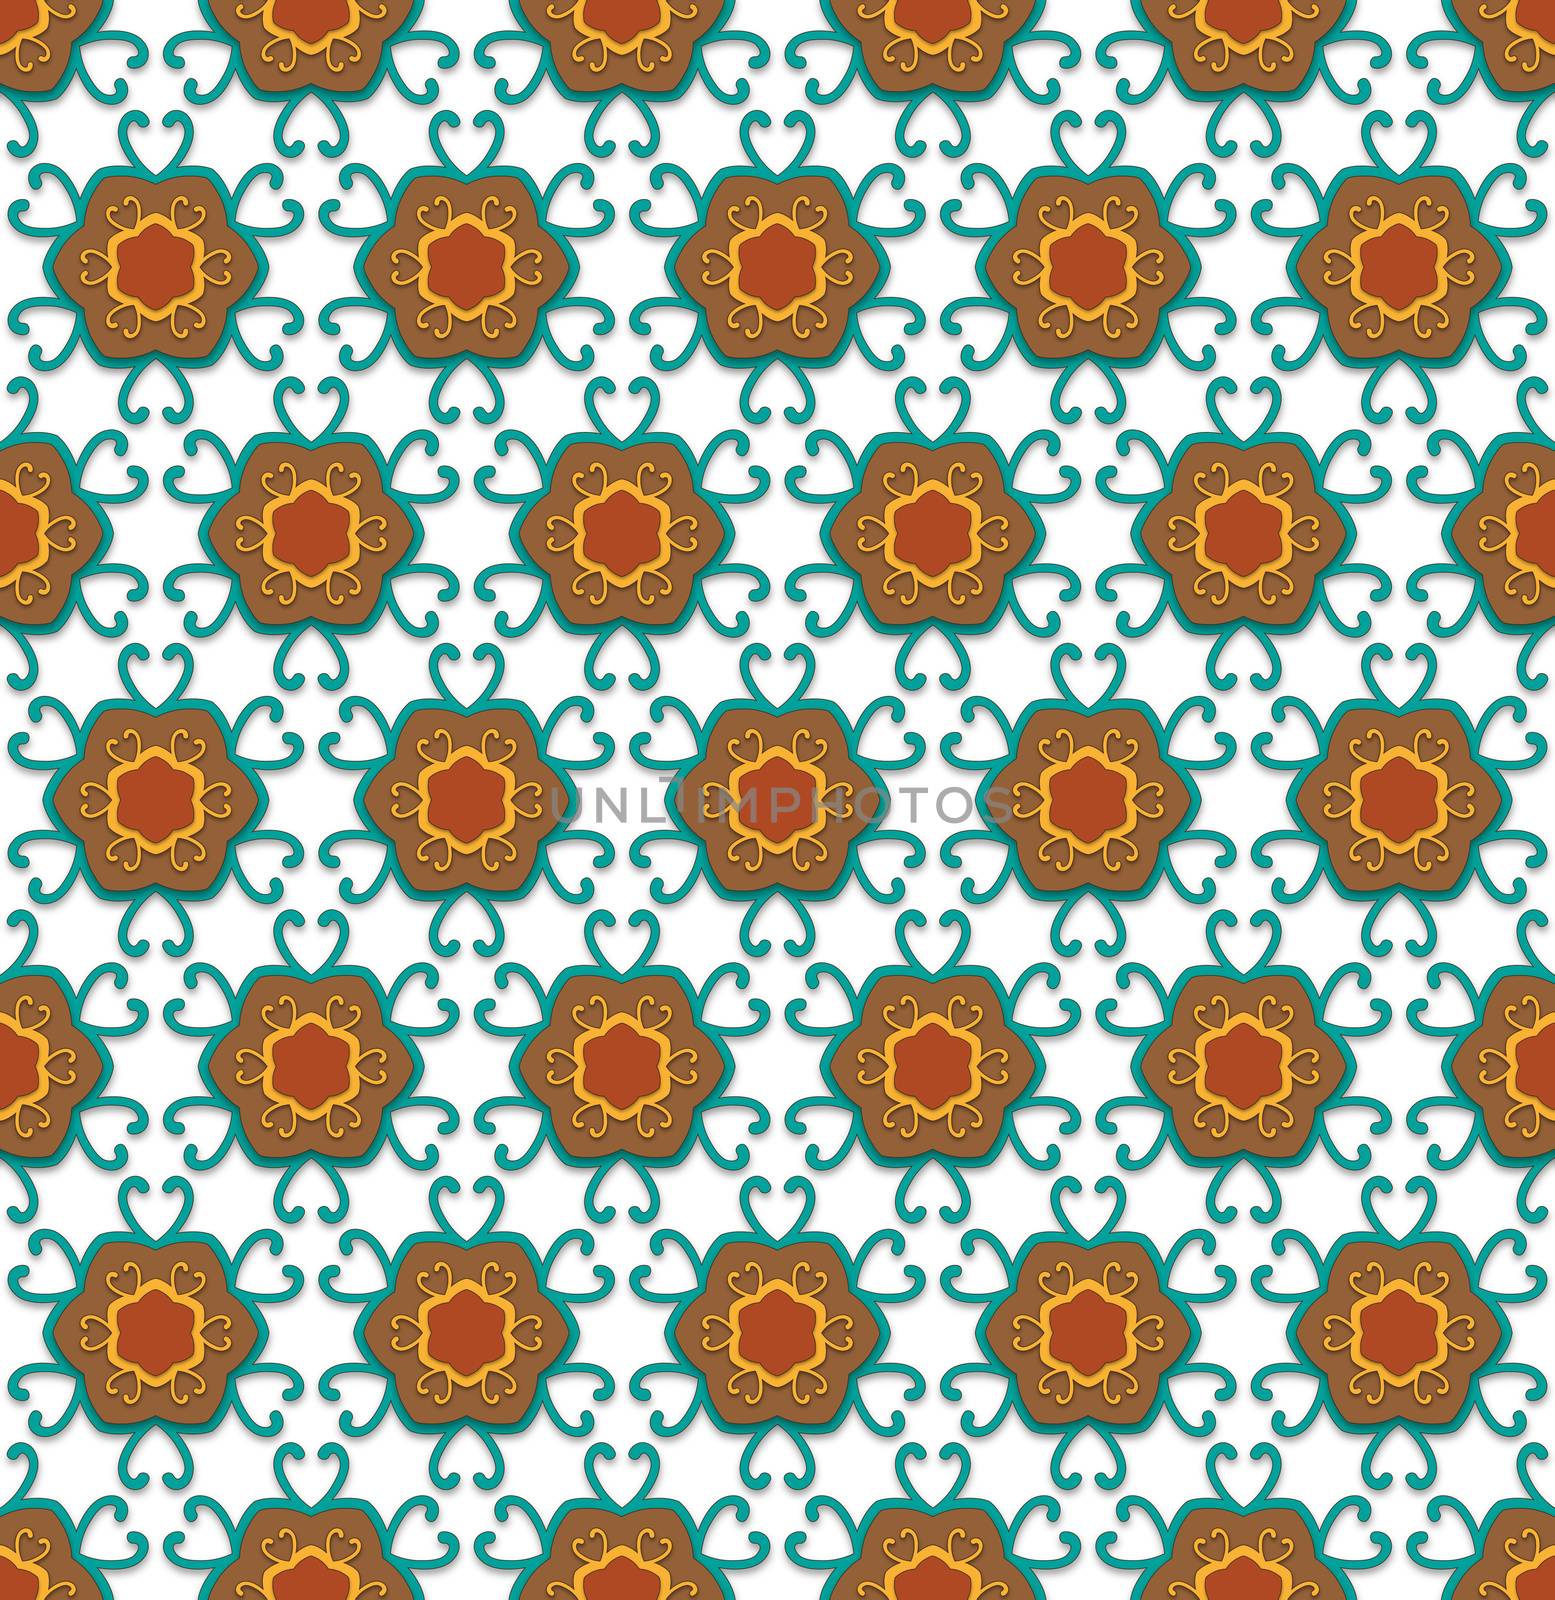 abstract background or textile medieval autumn floral pattern